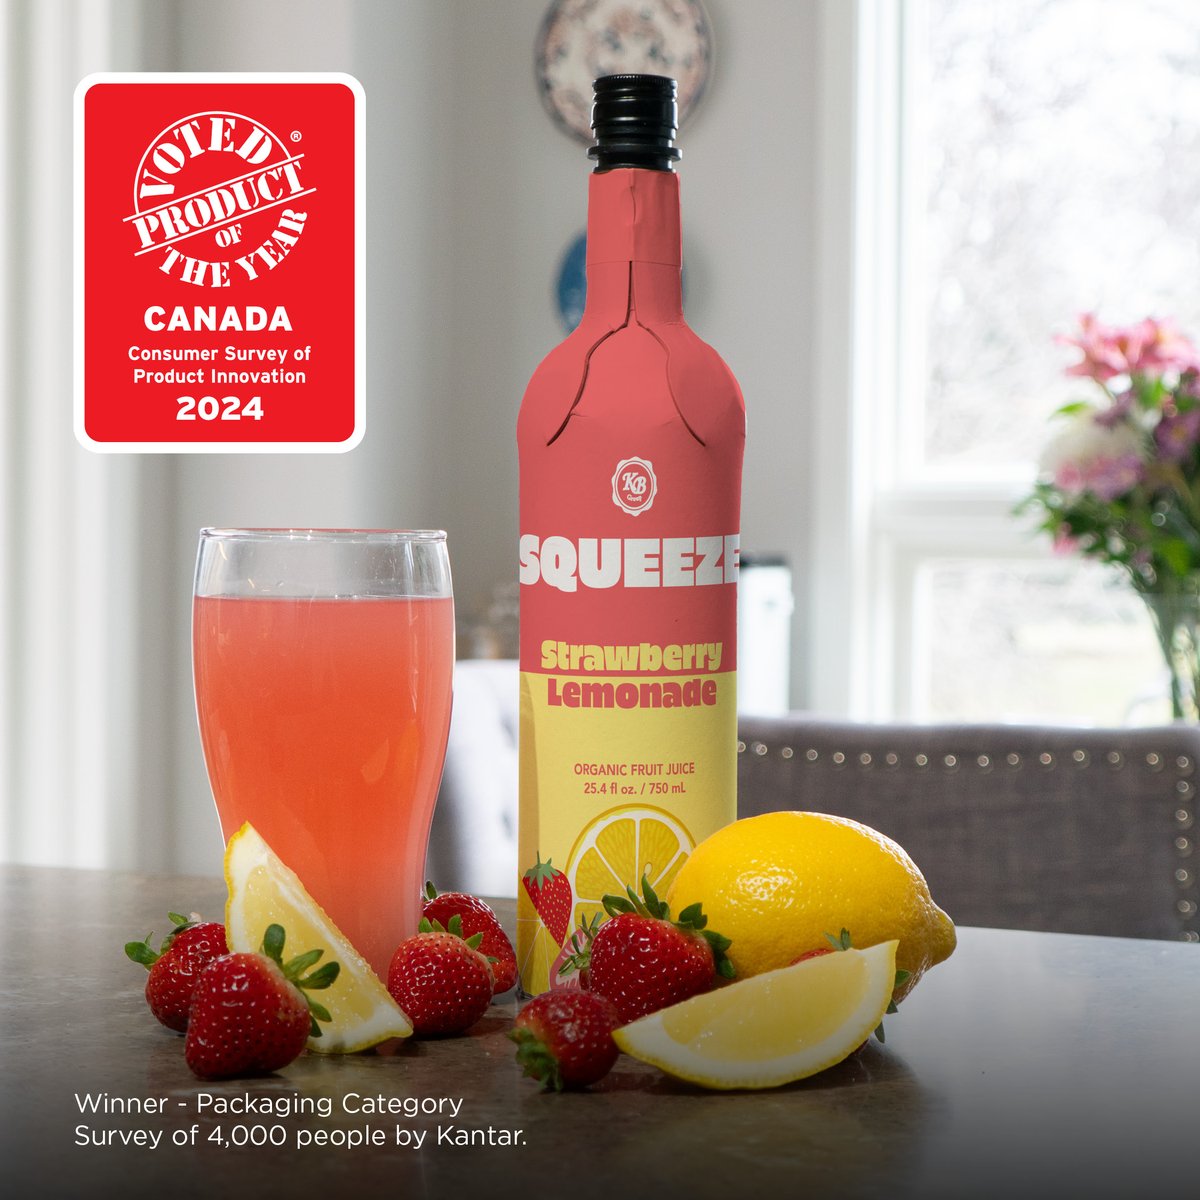 🍓The KB Bottle is the world’s first and only commercially available wine, spirits, juice, and olive oil bottle, made from 100% recycled paper. Manufactured in Cambridge, Ontario! 🍾 ♻️ #POYCanada2024 #paperbottlerevolution #sustainablepackaging #recyclable